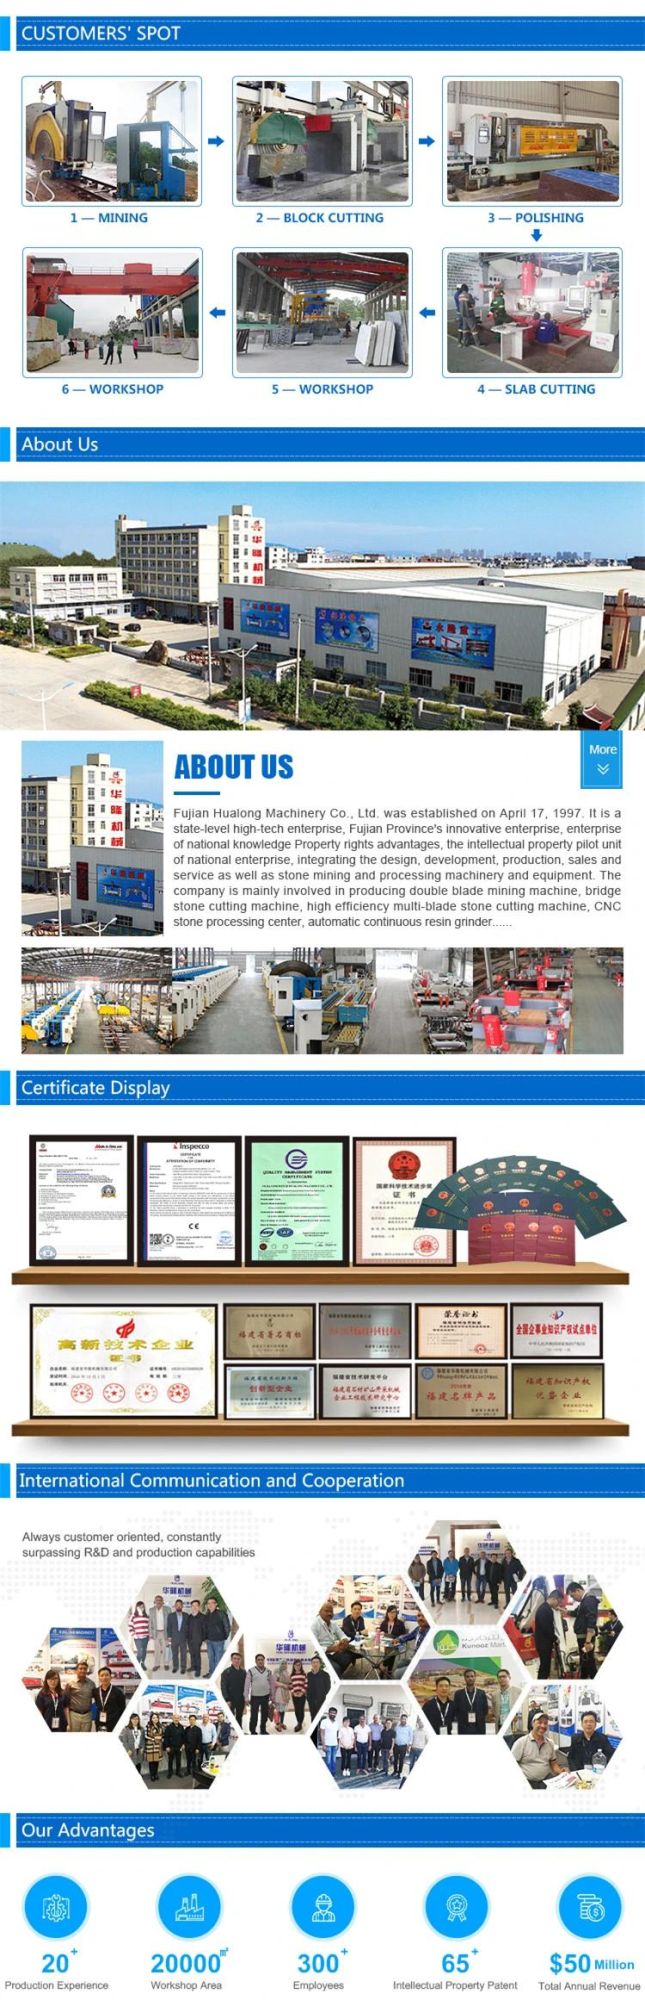 Hualong Machinery High Efficient Double Blade Stonecutter Quarry Mining Machine